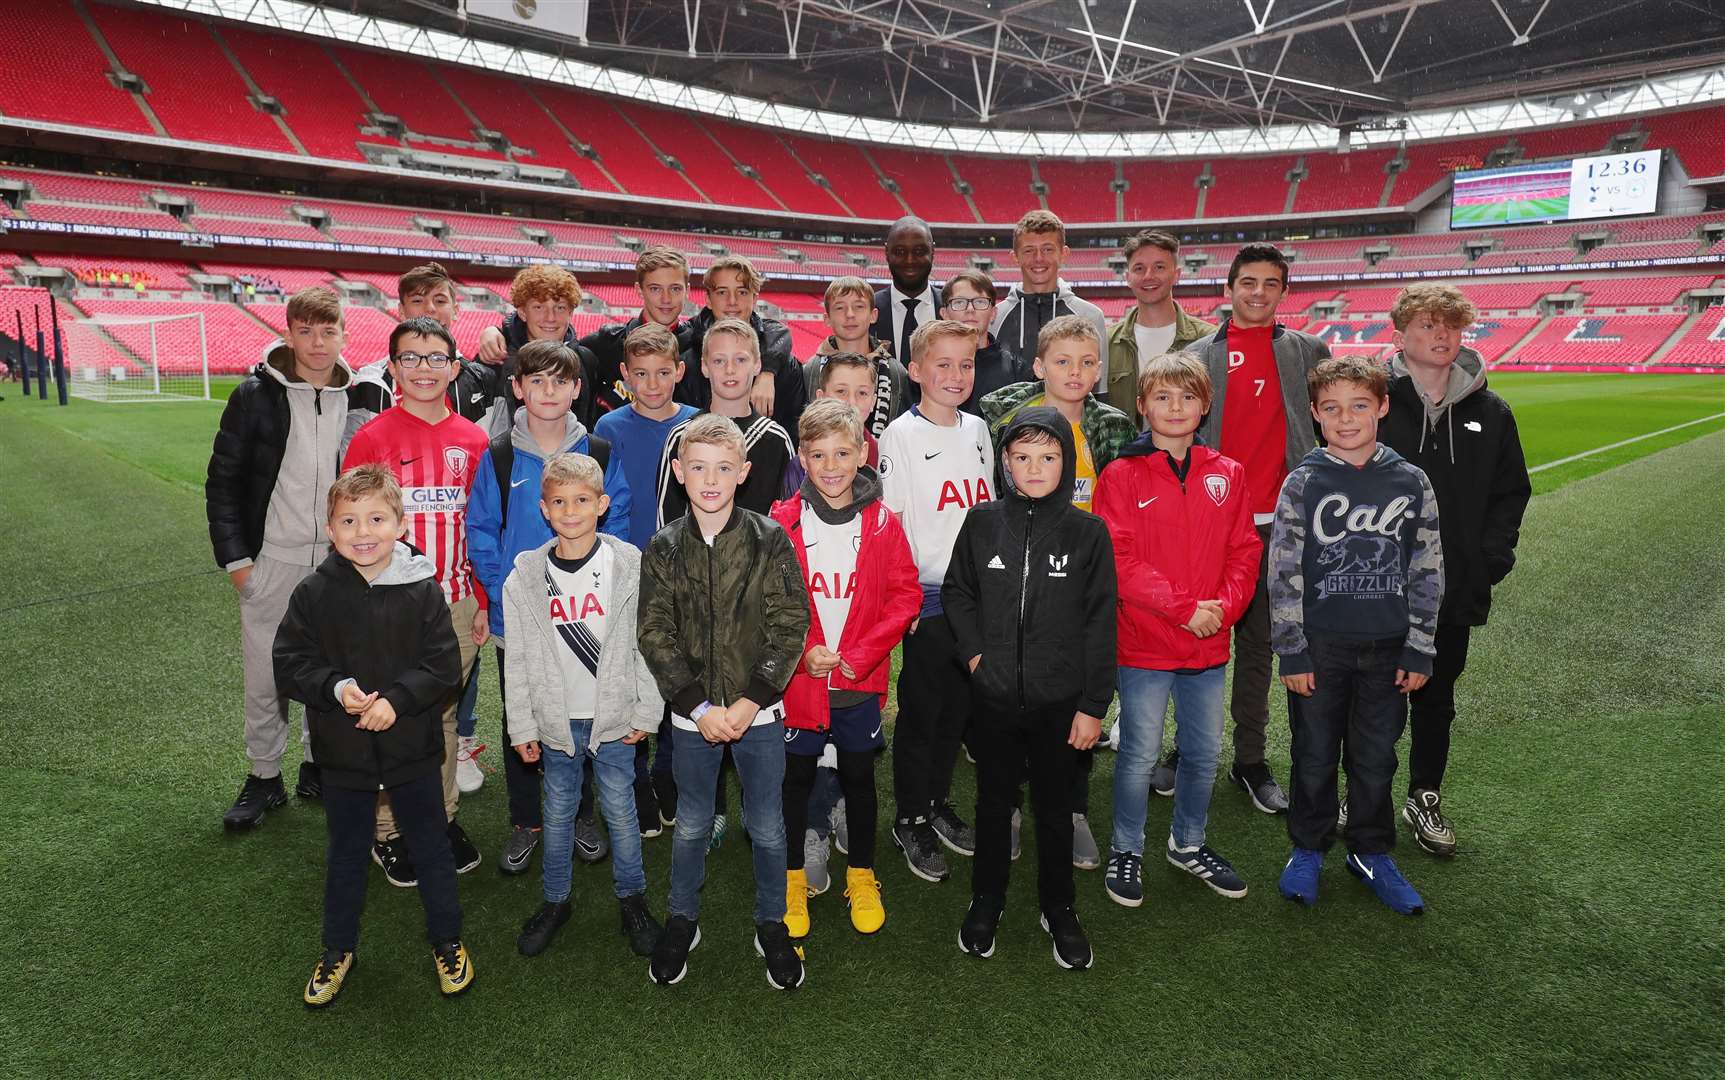 The group from Chartham Sports Club had an "unbelievable " day at Wembley (4674465)